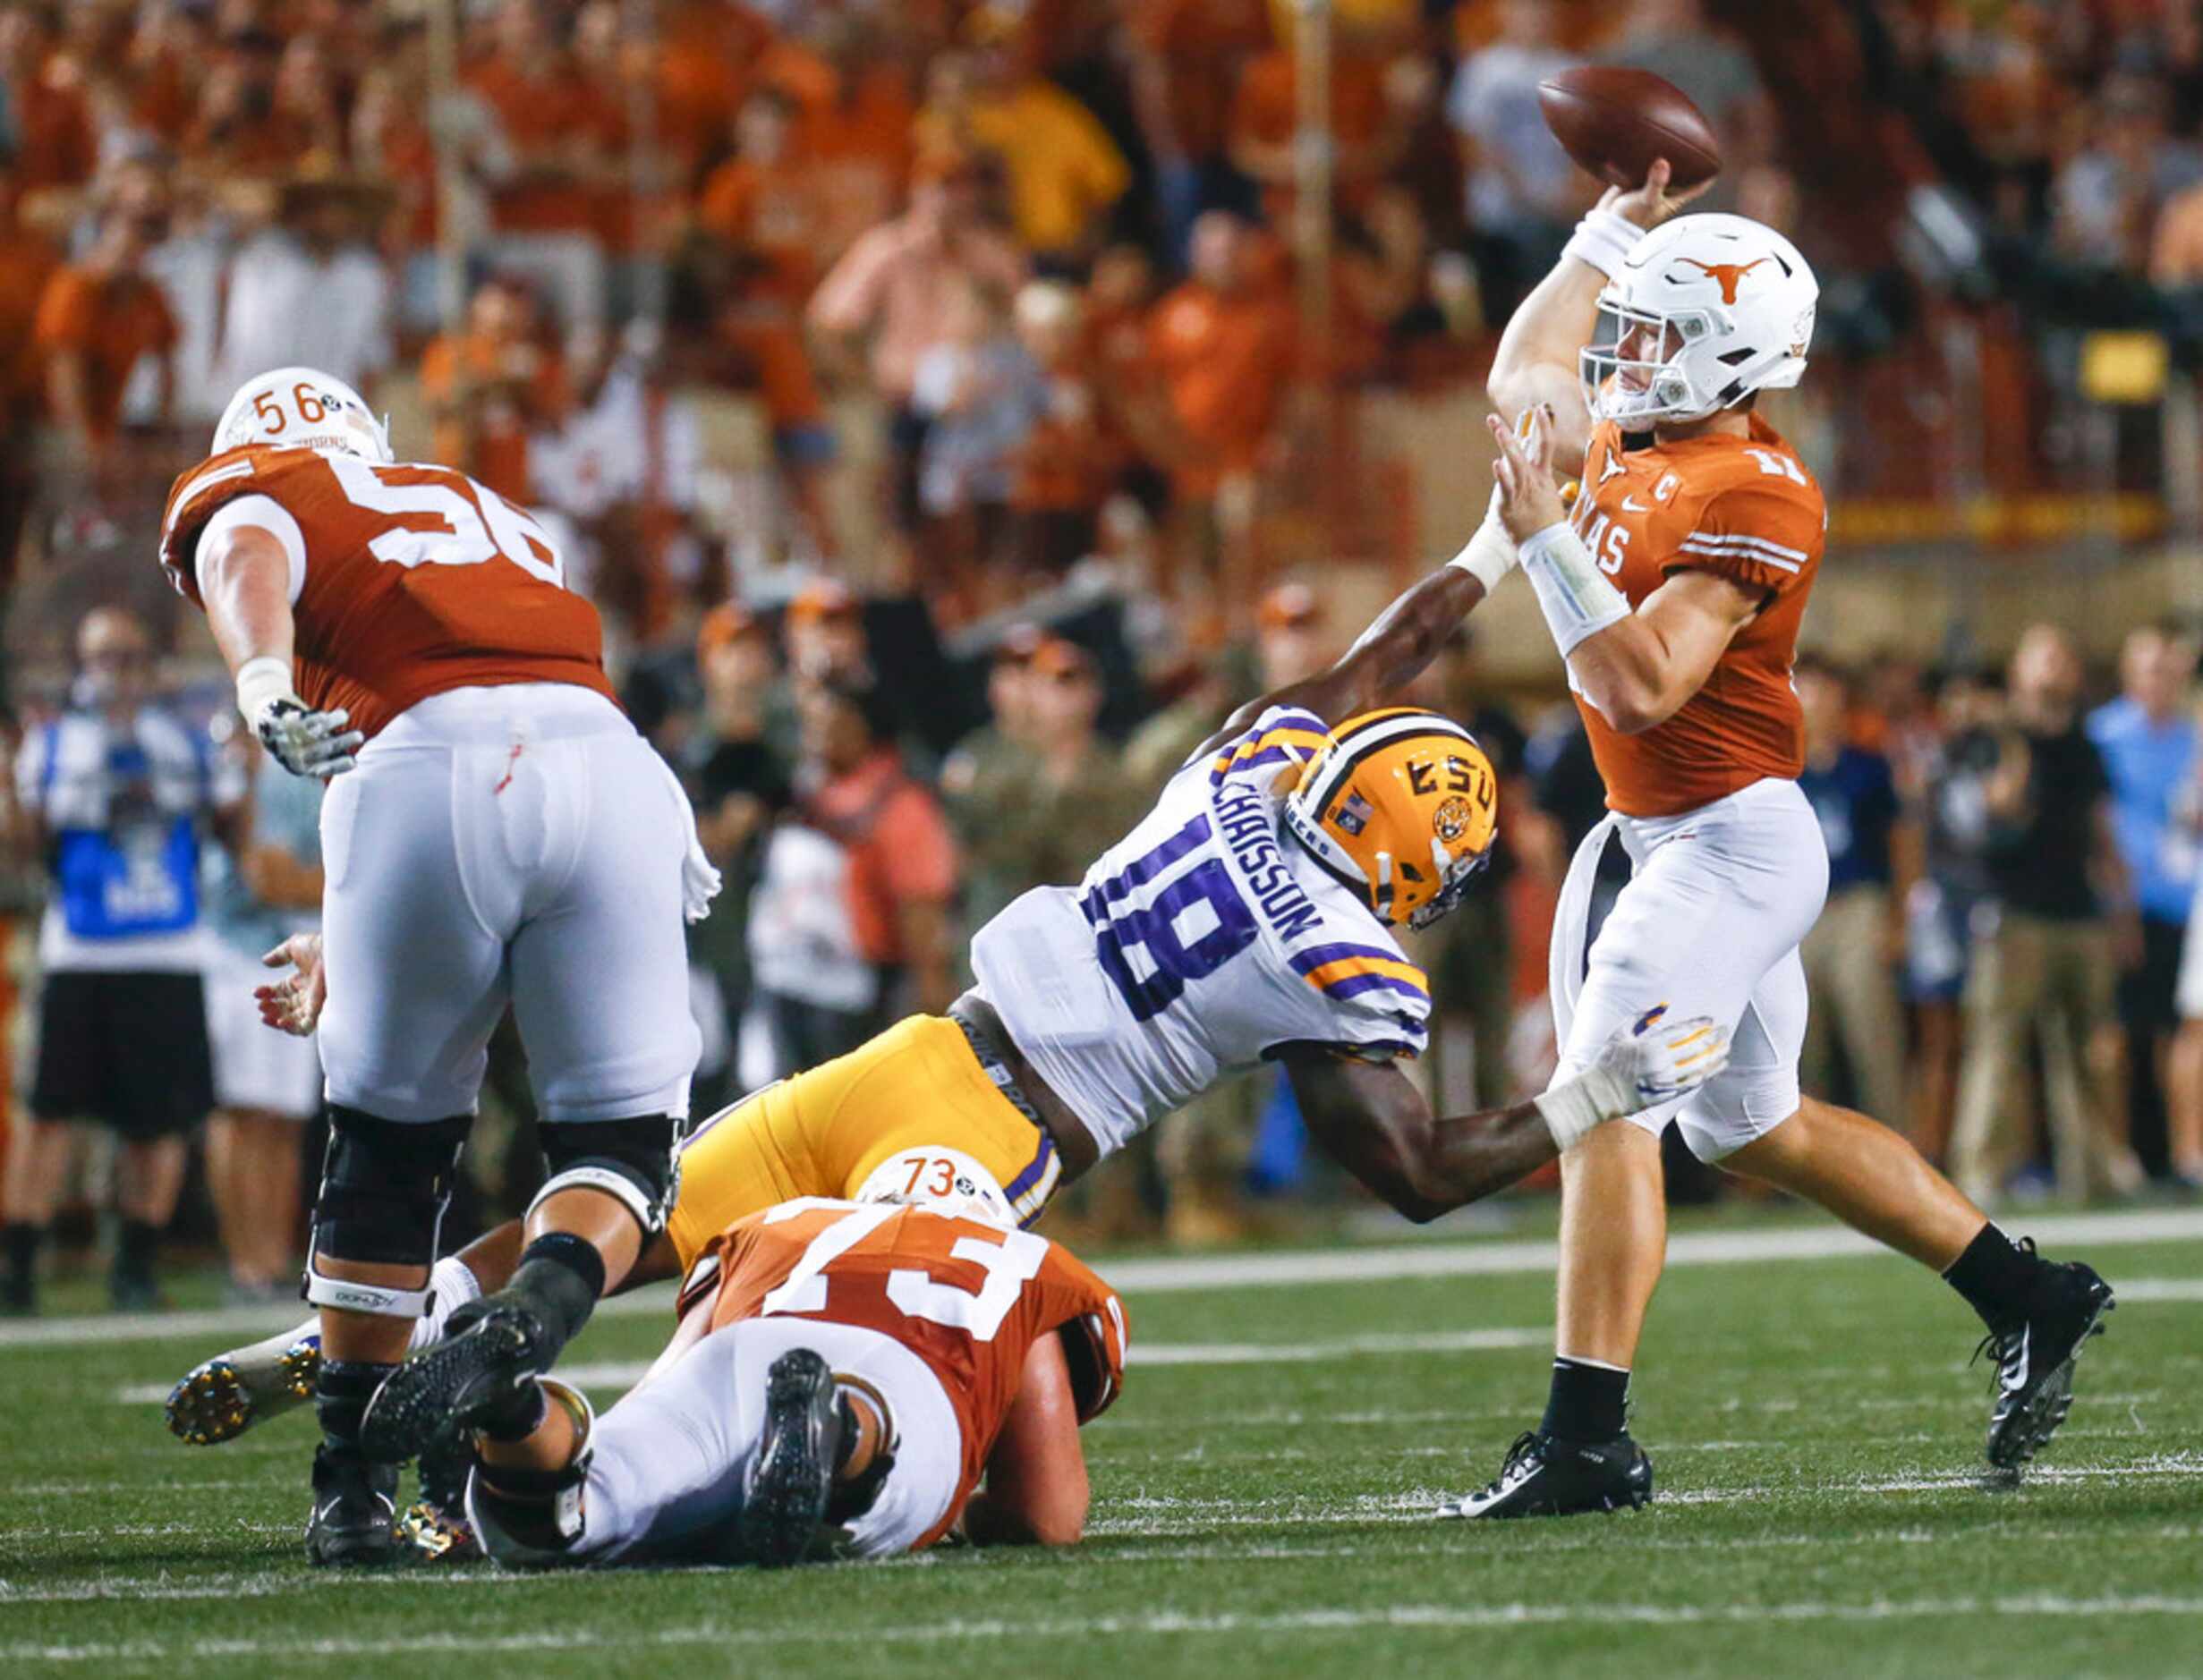 Texas Longhorns quarterback Sam Ehlinger (11) fires off a pass over an attempted block by...